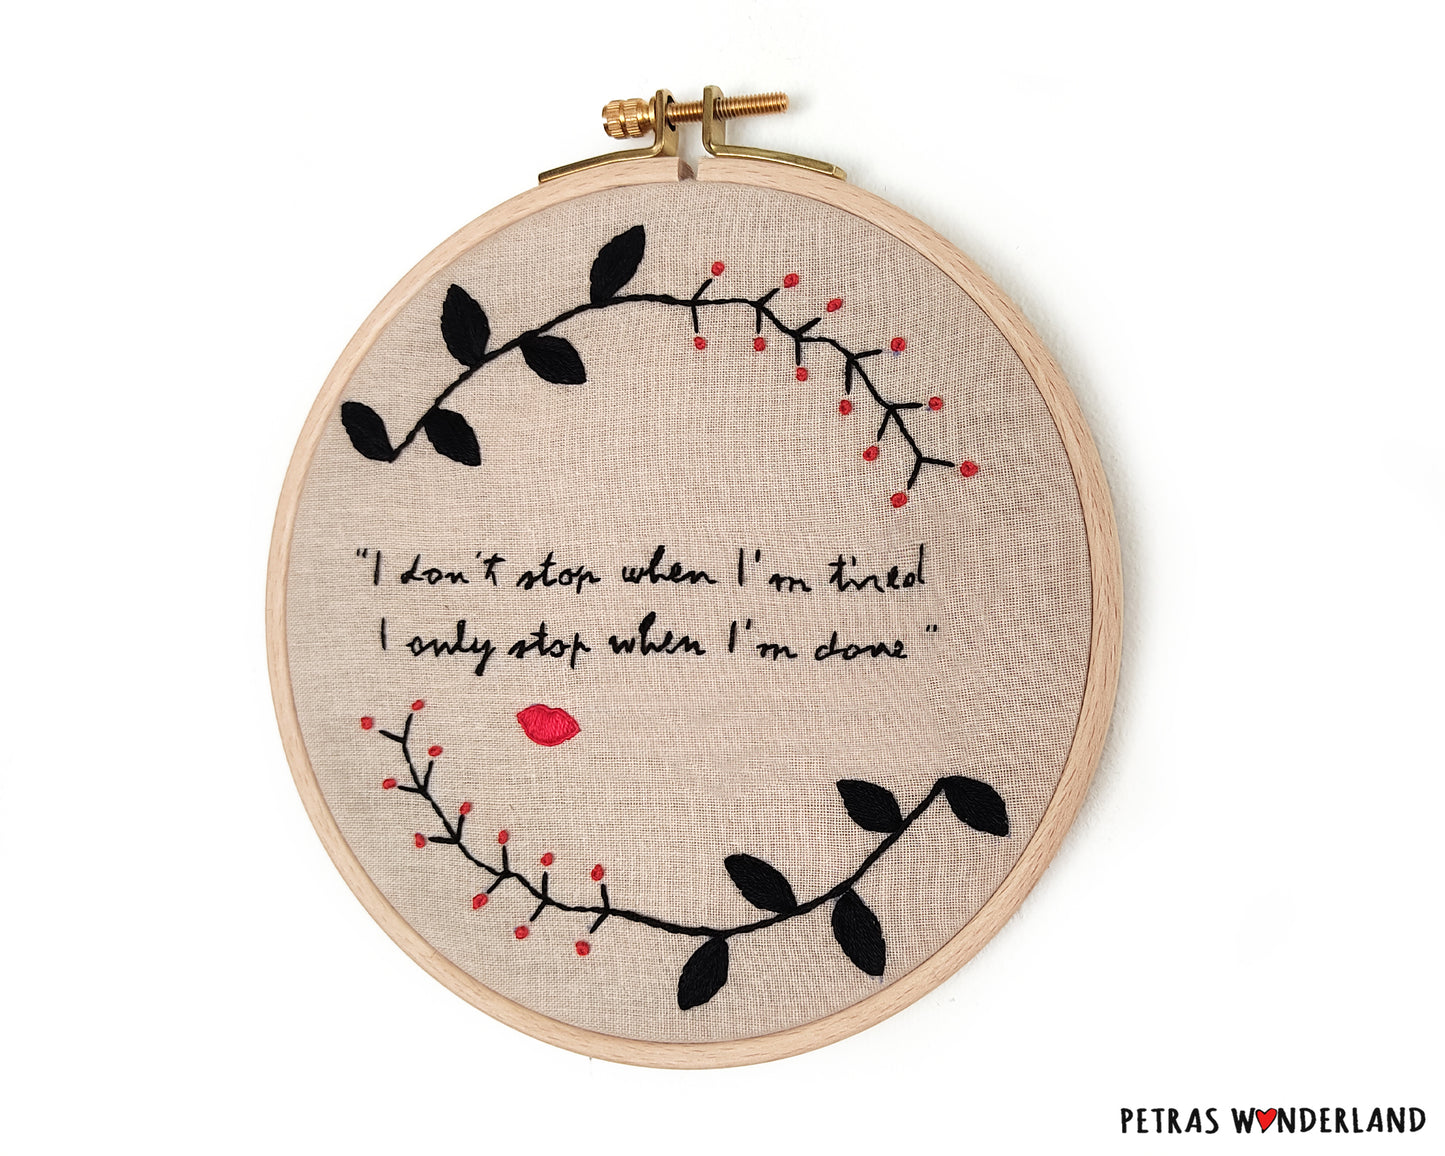 Actress Quote - PDF embroidery pattern and tutorial 03